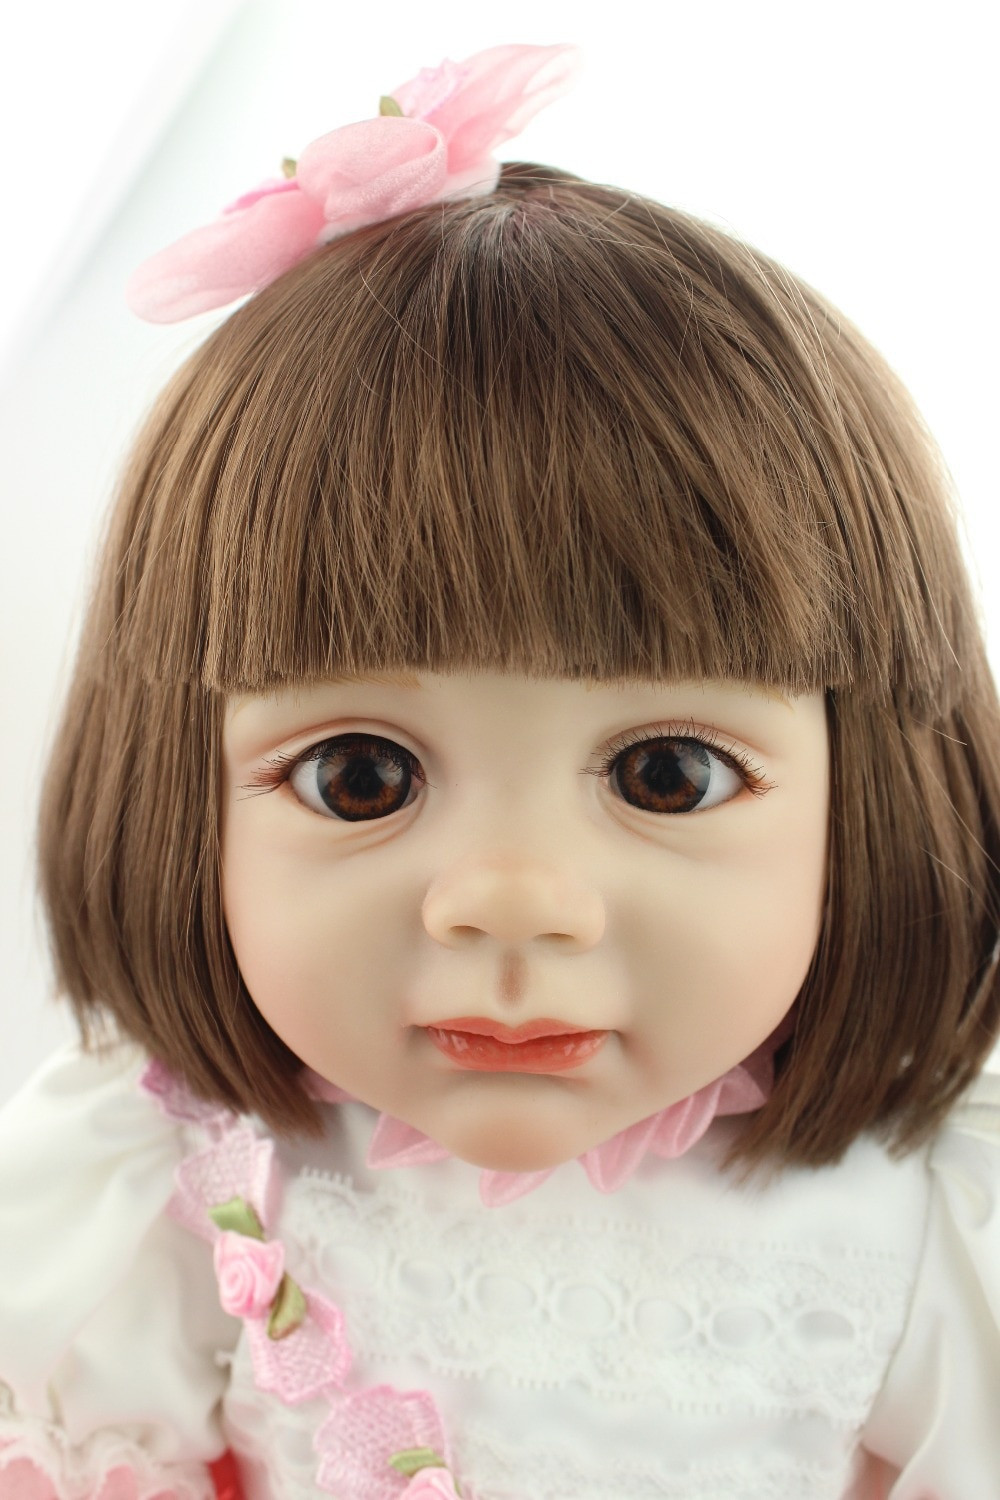 Baby Dolls With Red Hair
 Aliexpress Buy 2015 new design 24inch Reborn Toddler baby doll rooted human hair Fridolin